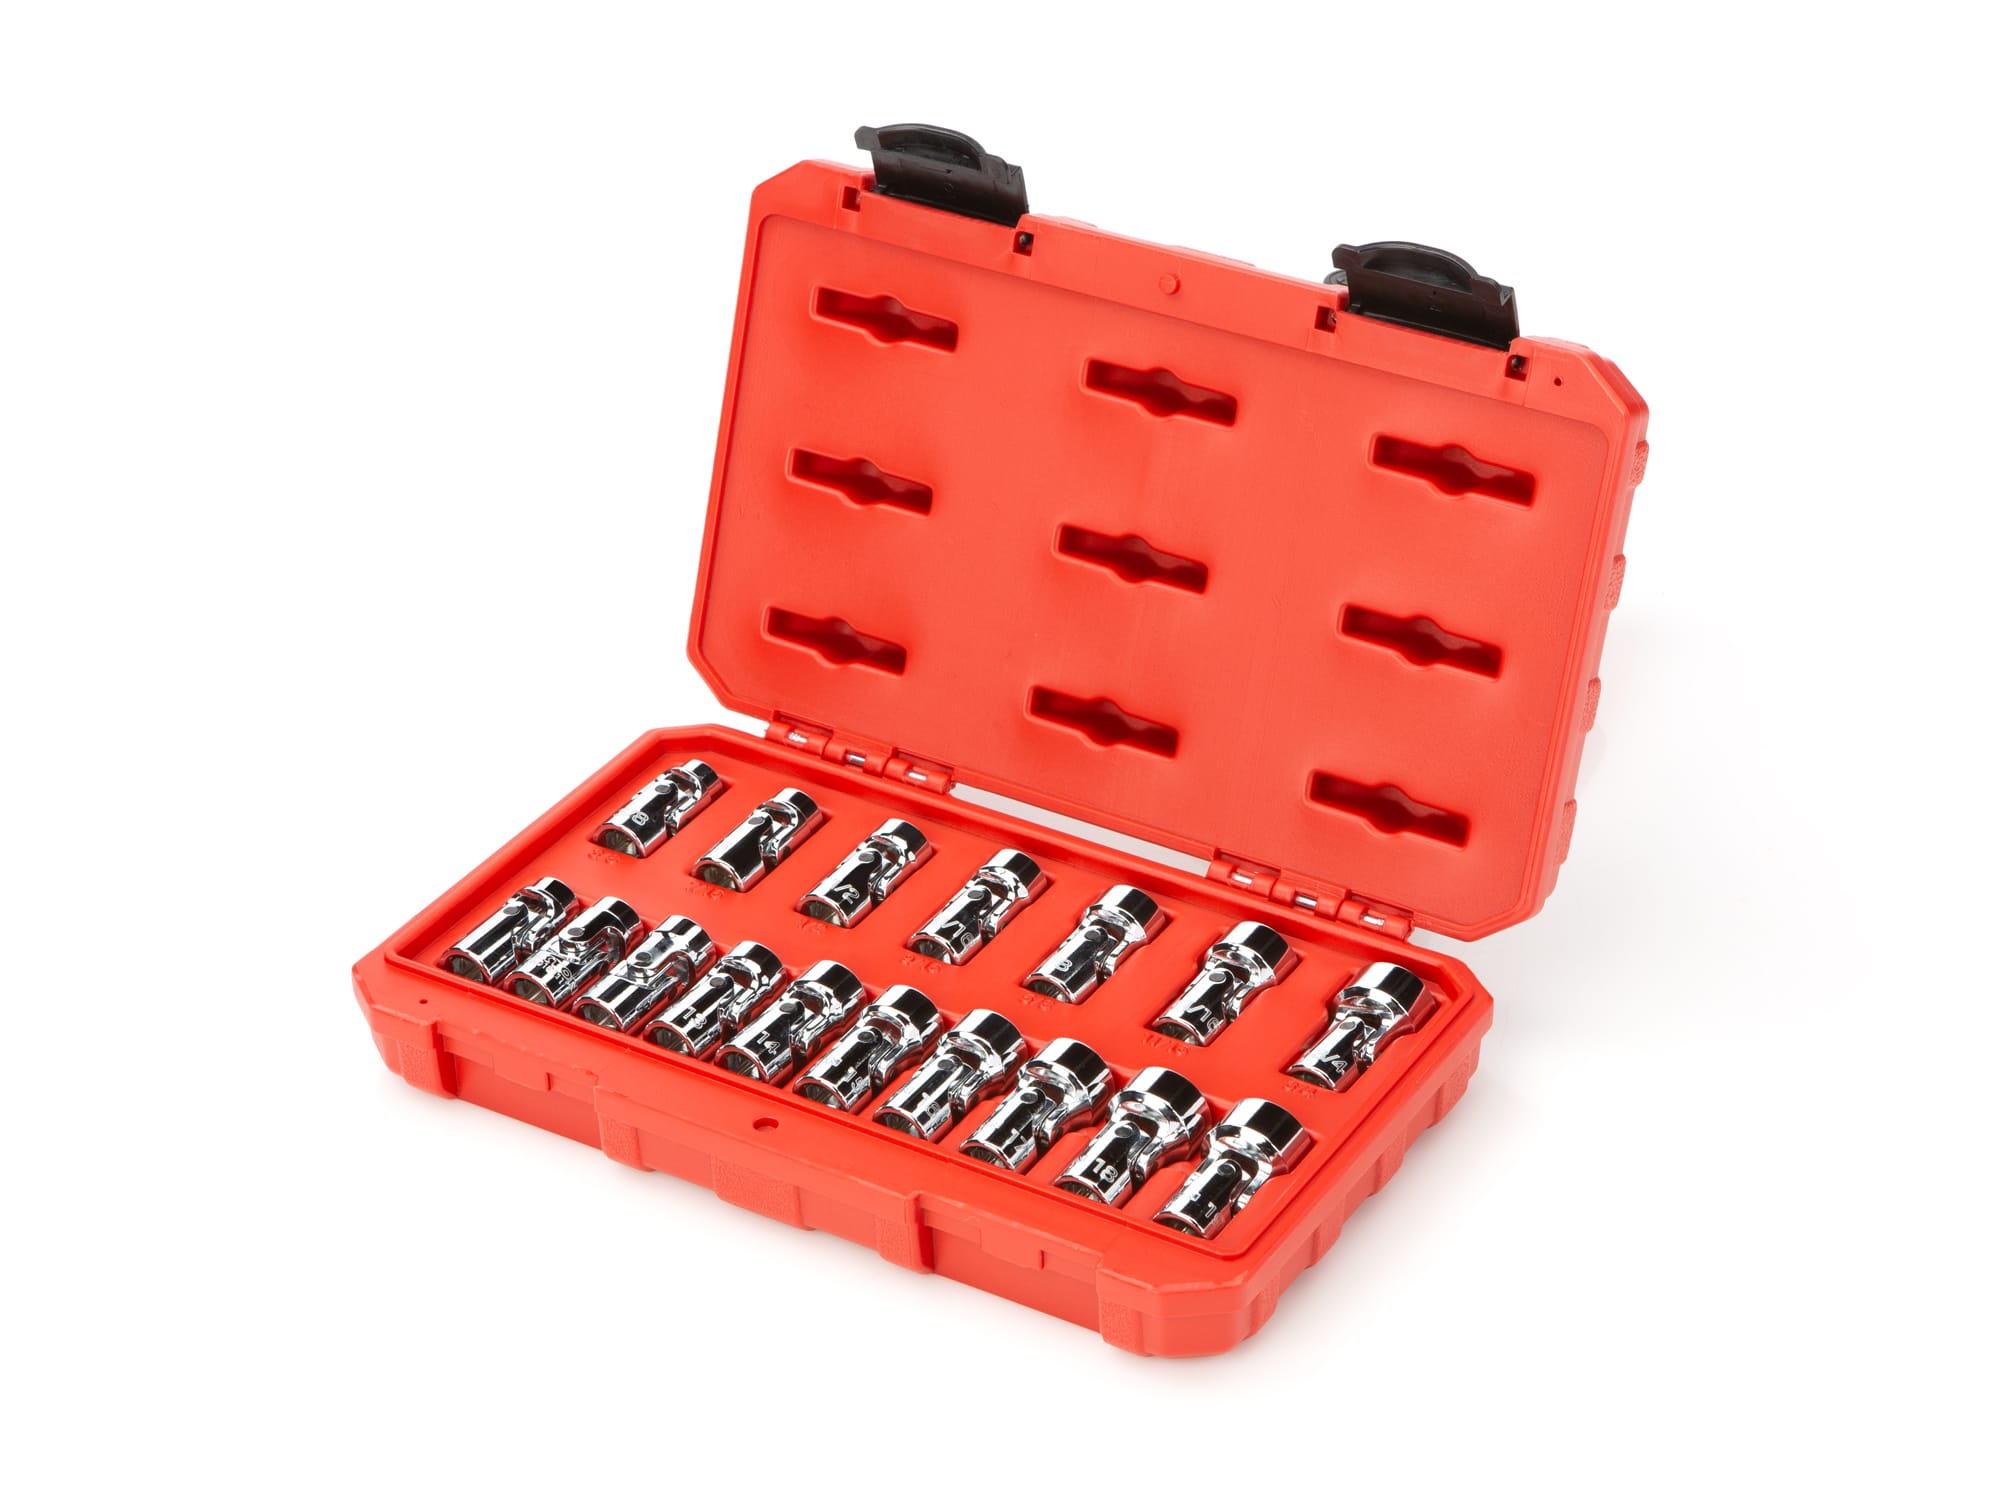 Britool A91 Joint Universel Disque 3/8in pour Socket Set adaptateur pivotant NEUF